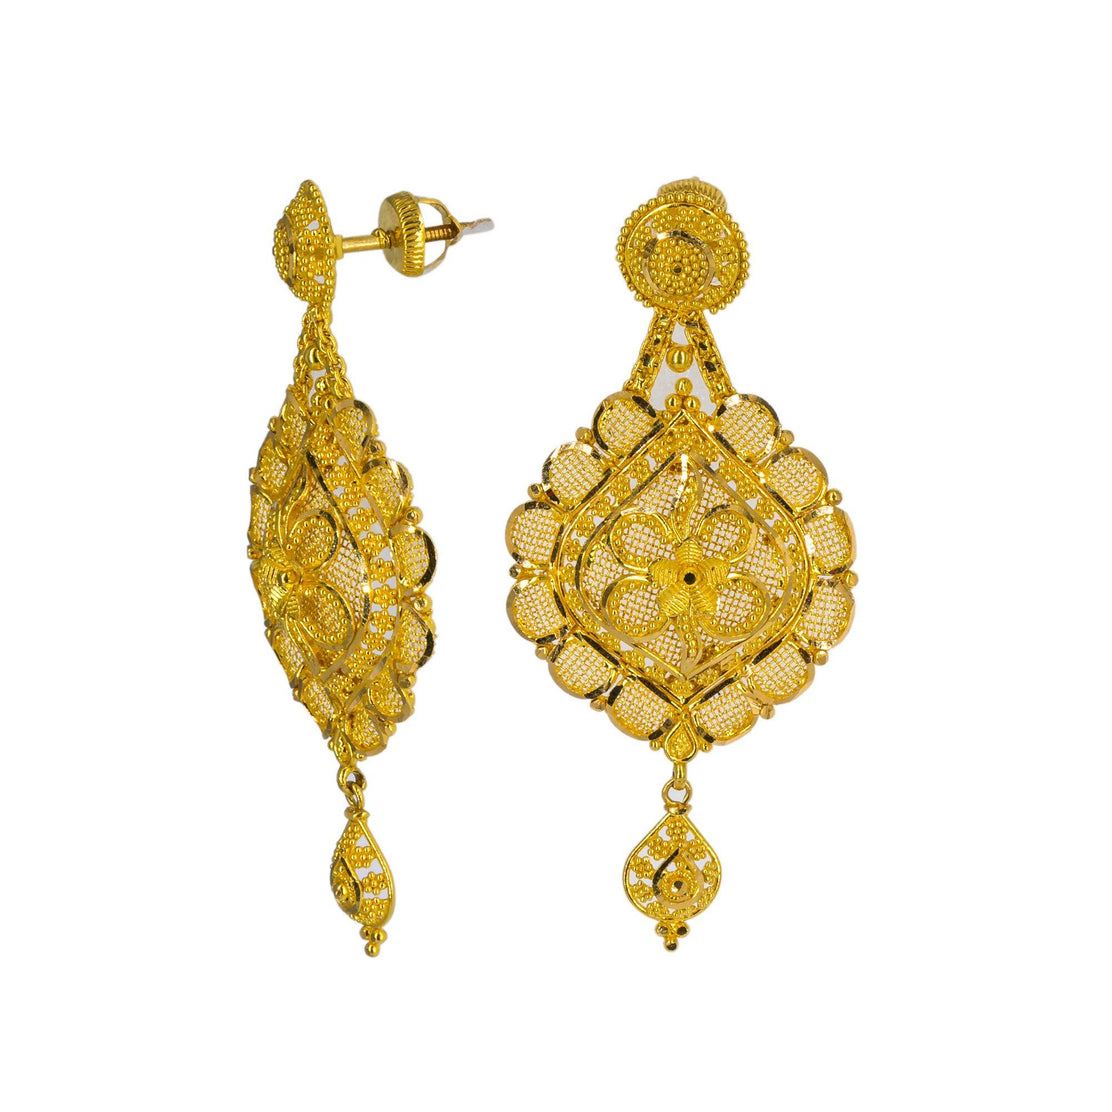 Emerald green earrings, Antique gold plated earrings at ₹1250 | Azilaa